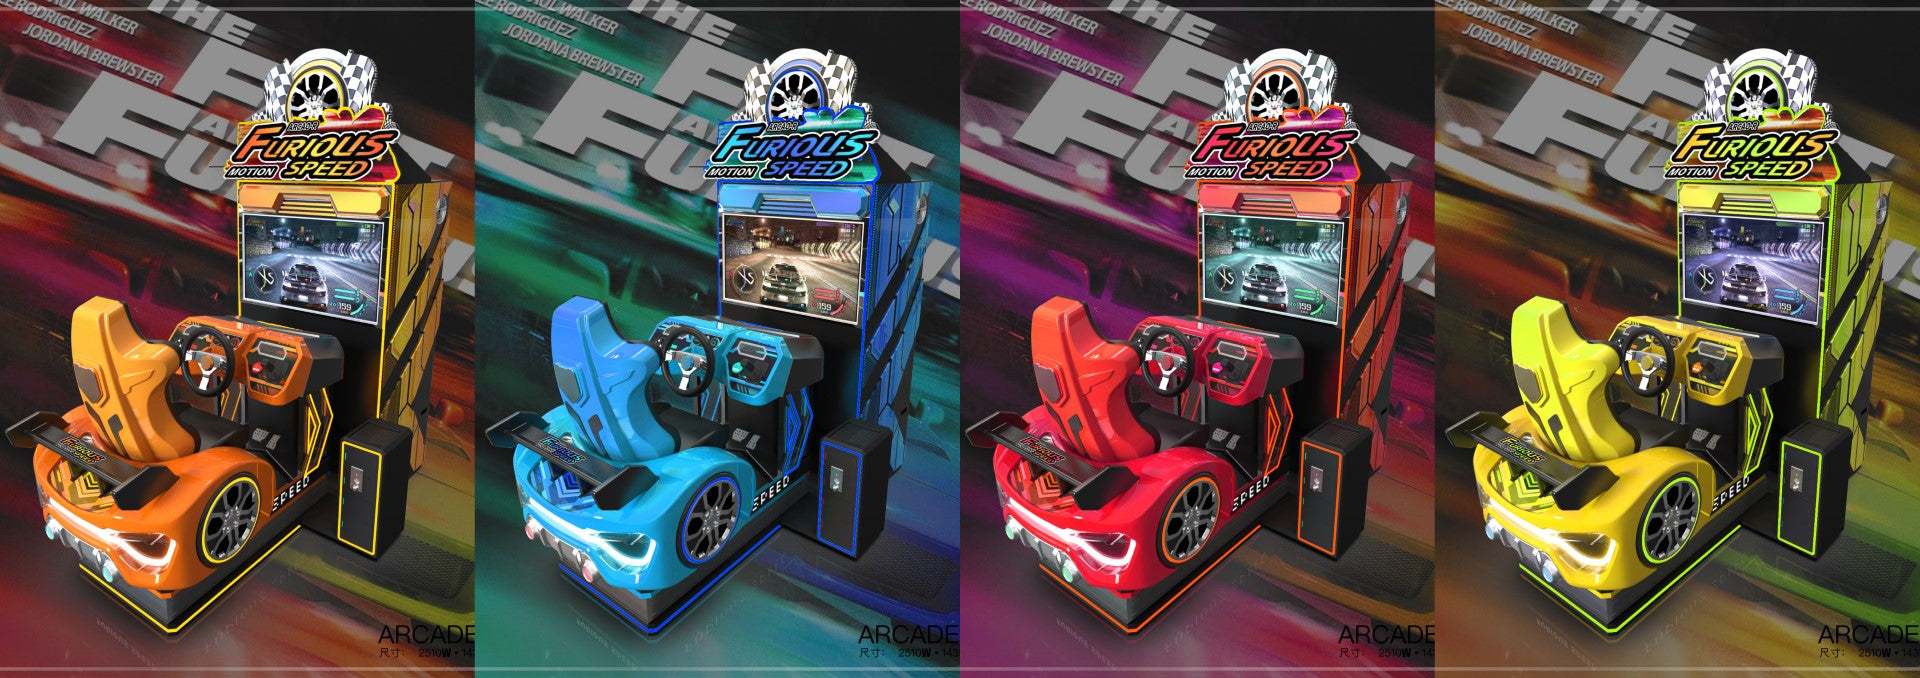 Furious Speed - Motion - Video Arcade Game